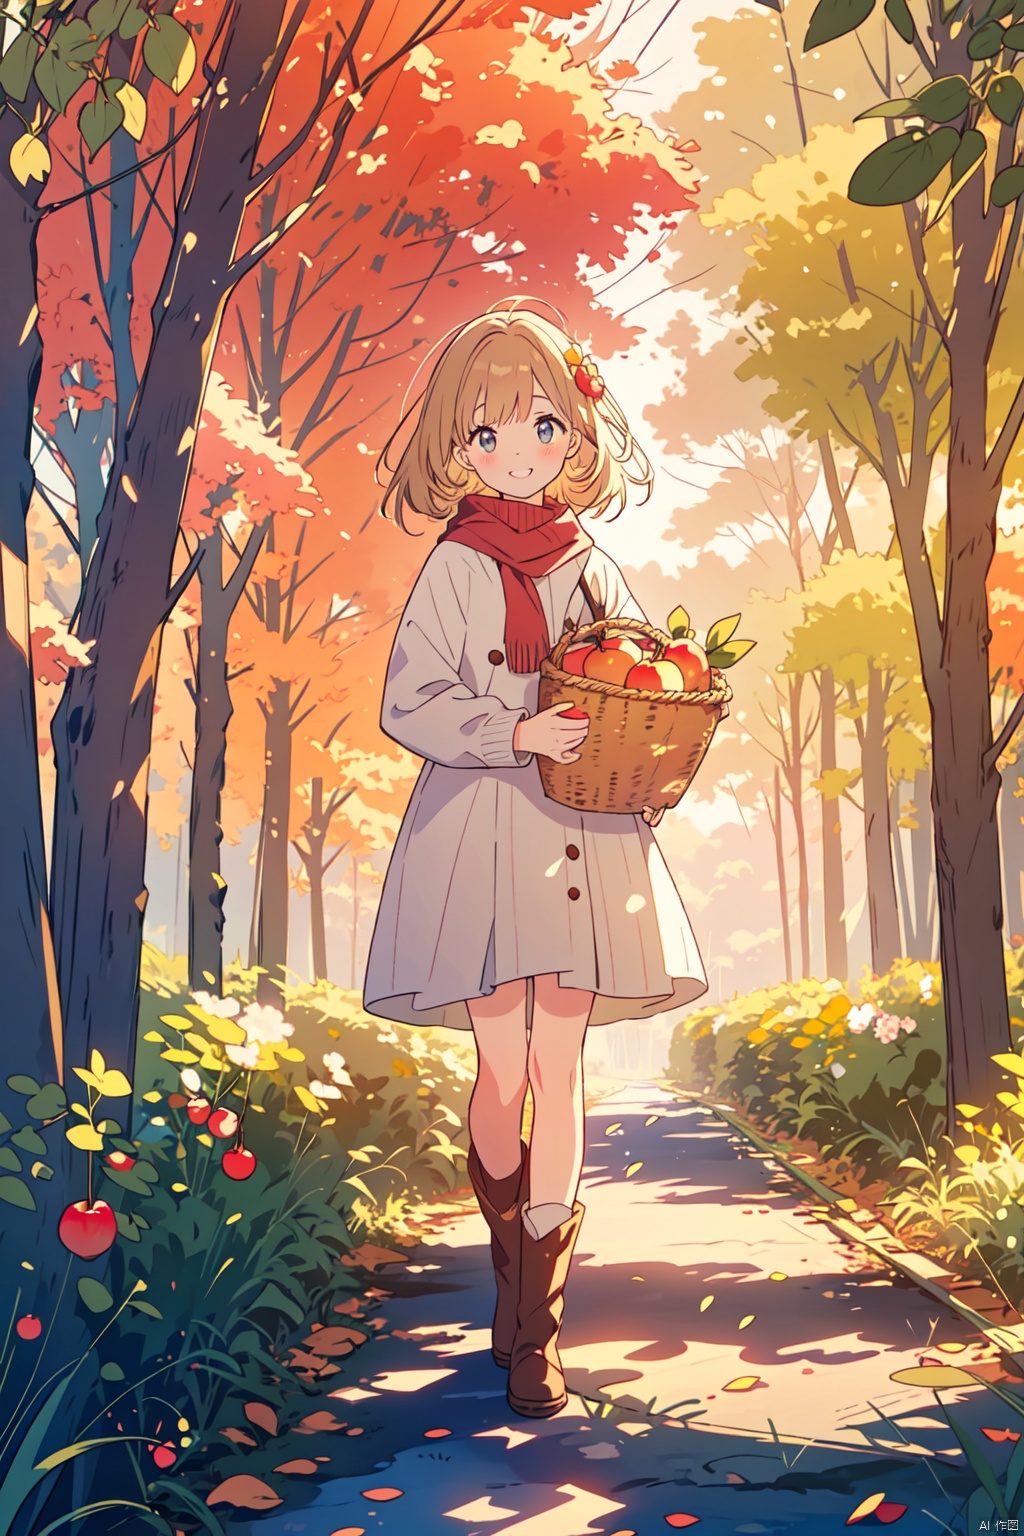 A young girl, embracing a basket of freshly picked apples, under a blossoming cherry tree in autumn, surrounded by fallen leaves in shades of red and gold, wearing an oversized woolen sweater, ankle boots, with rosy cheeks and a joyful grin, sunshine filtering through the colorful foliage casting dappled light upon her, against a backdrop of a charming countryside orchard., ((poakl))